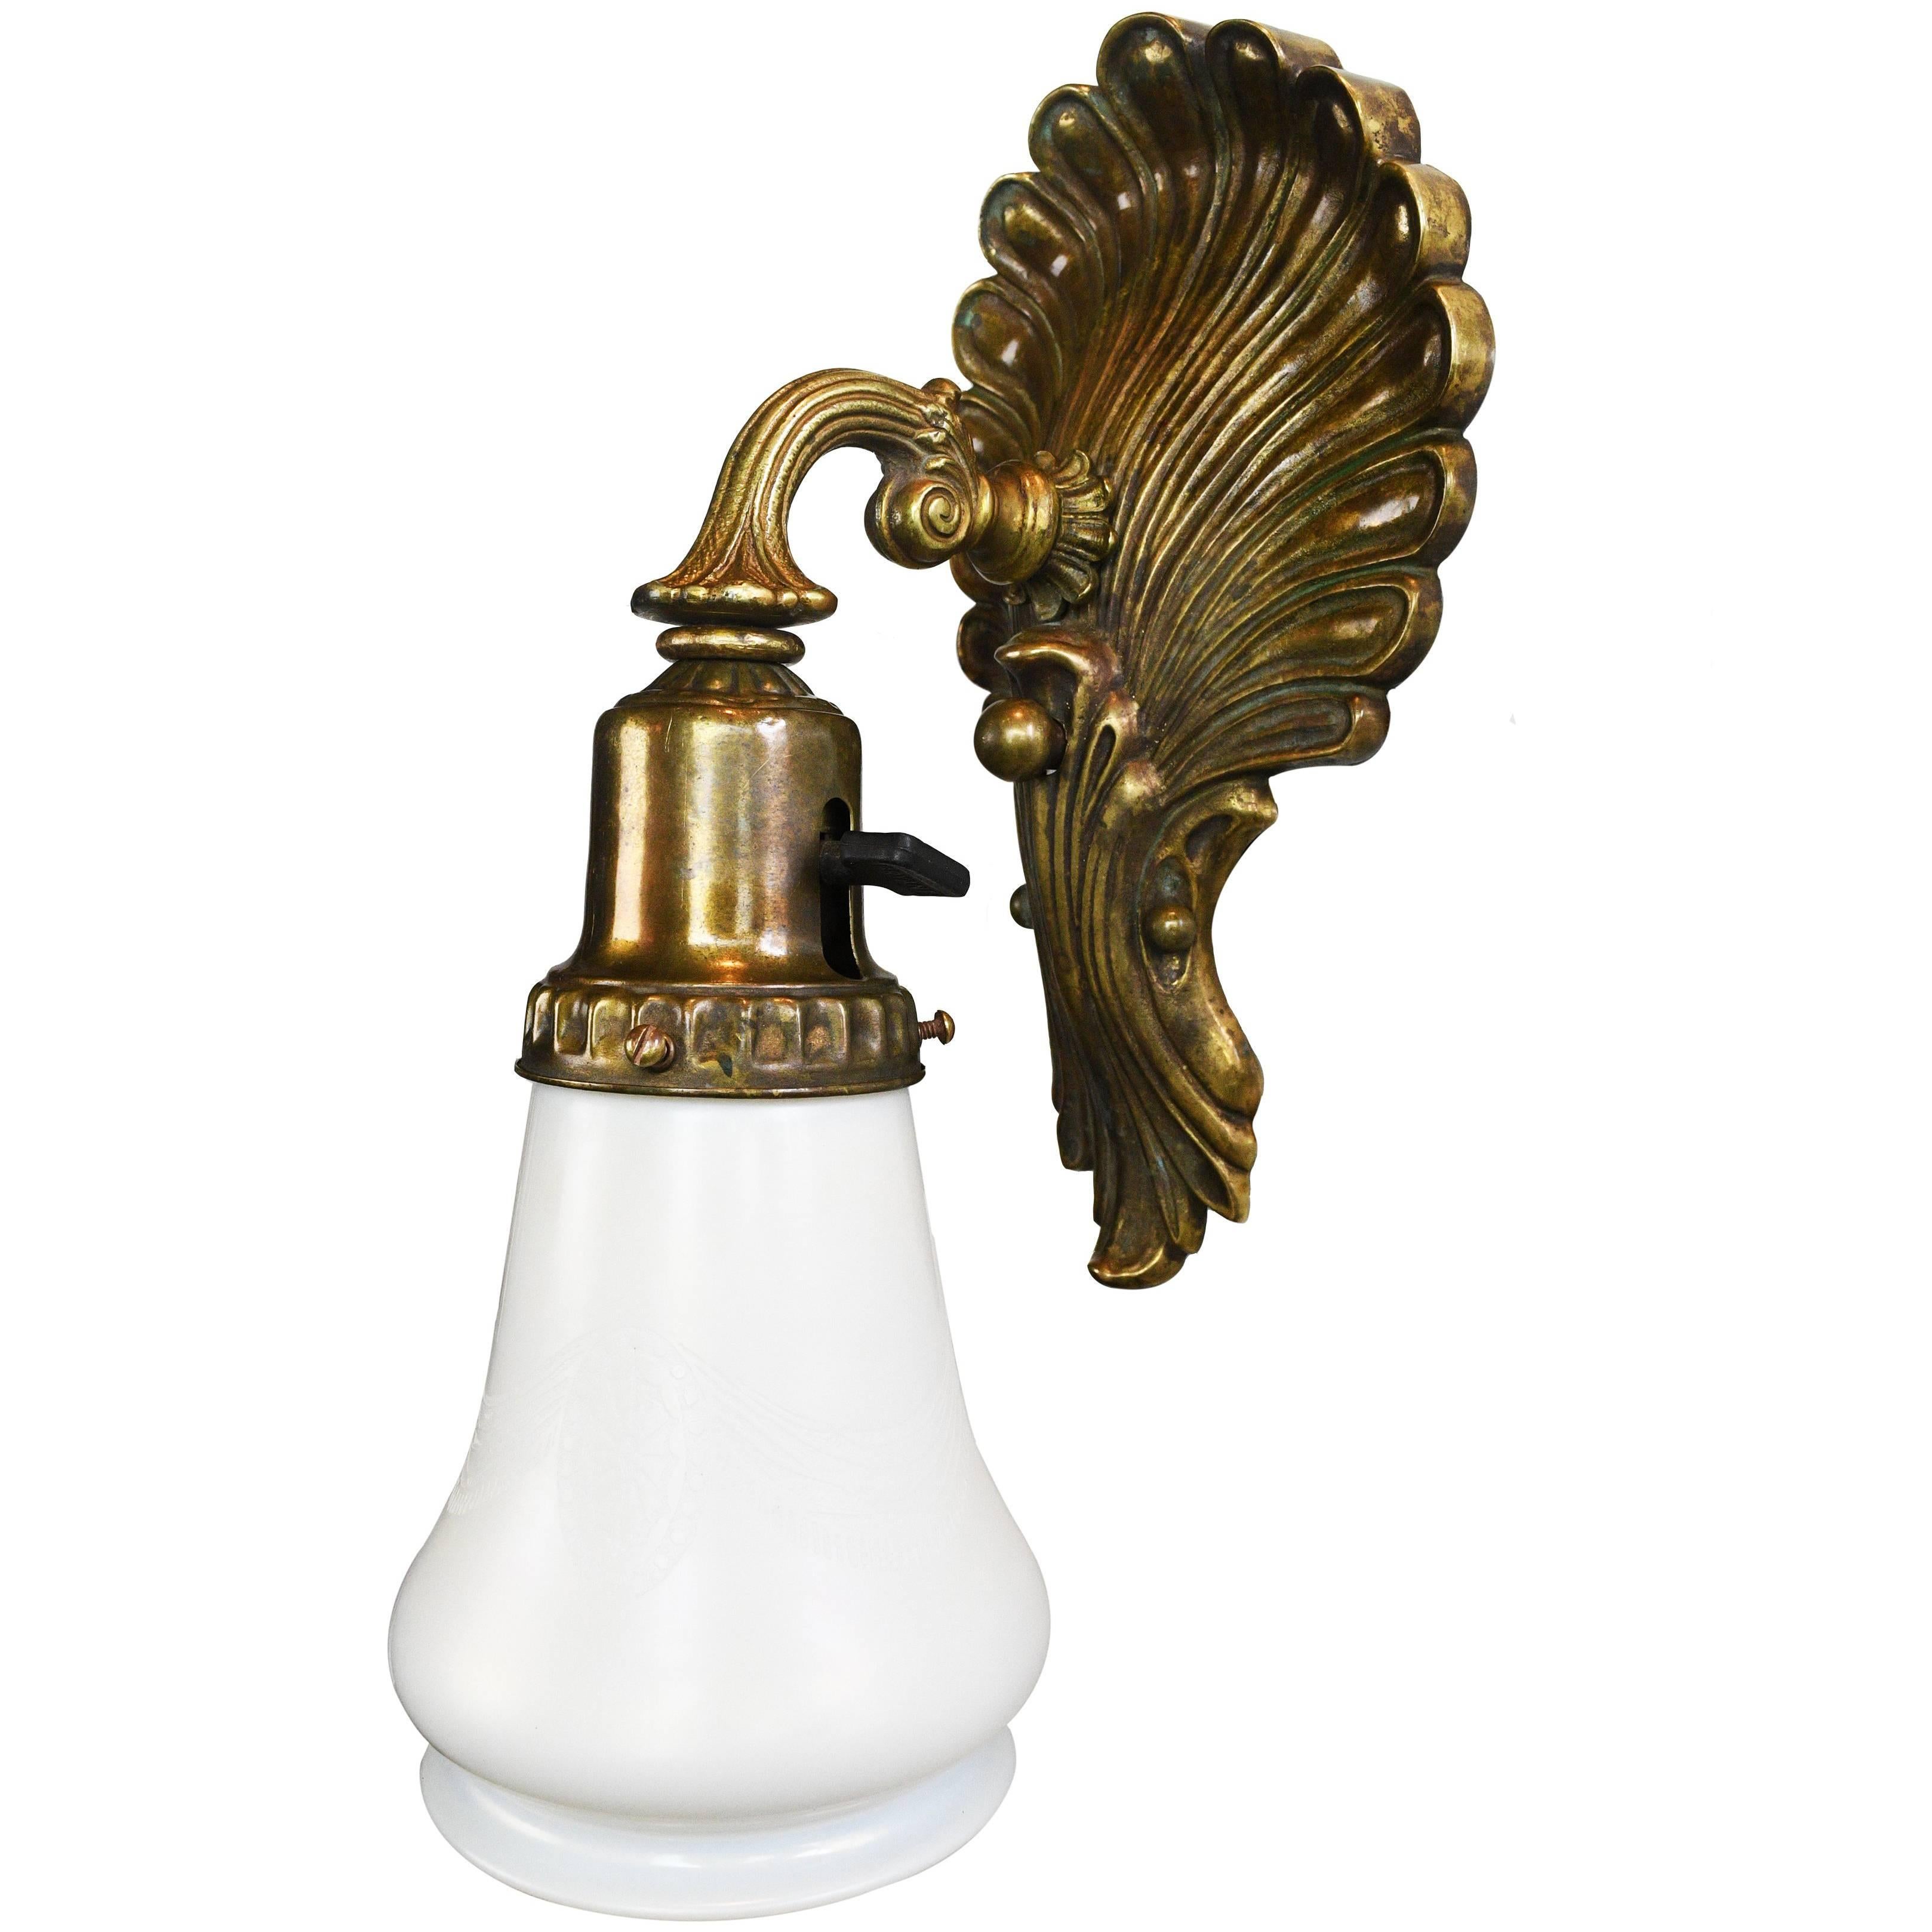 Brass Pullman Train Sconce with Etched Steuben Shade